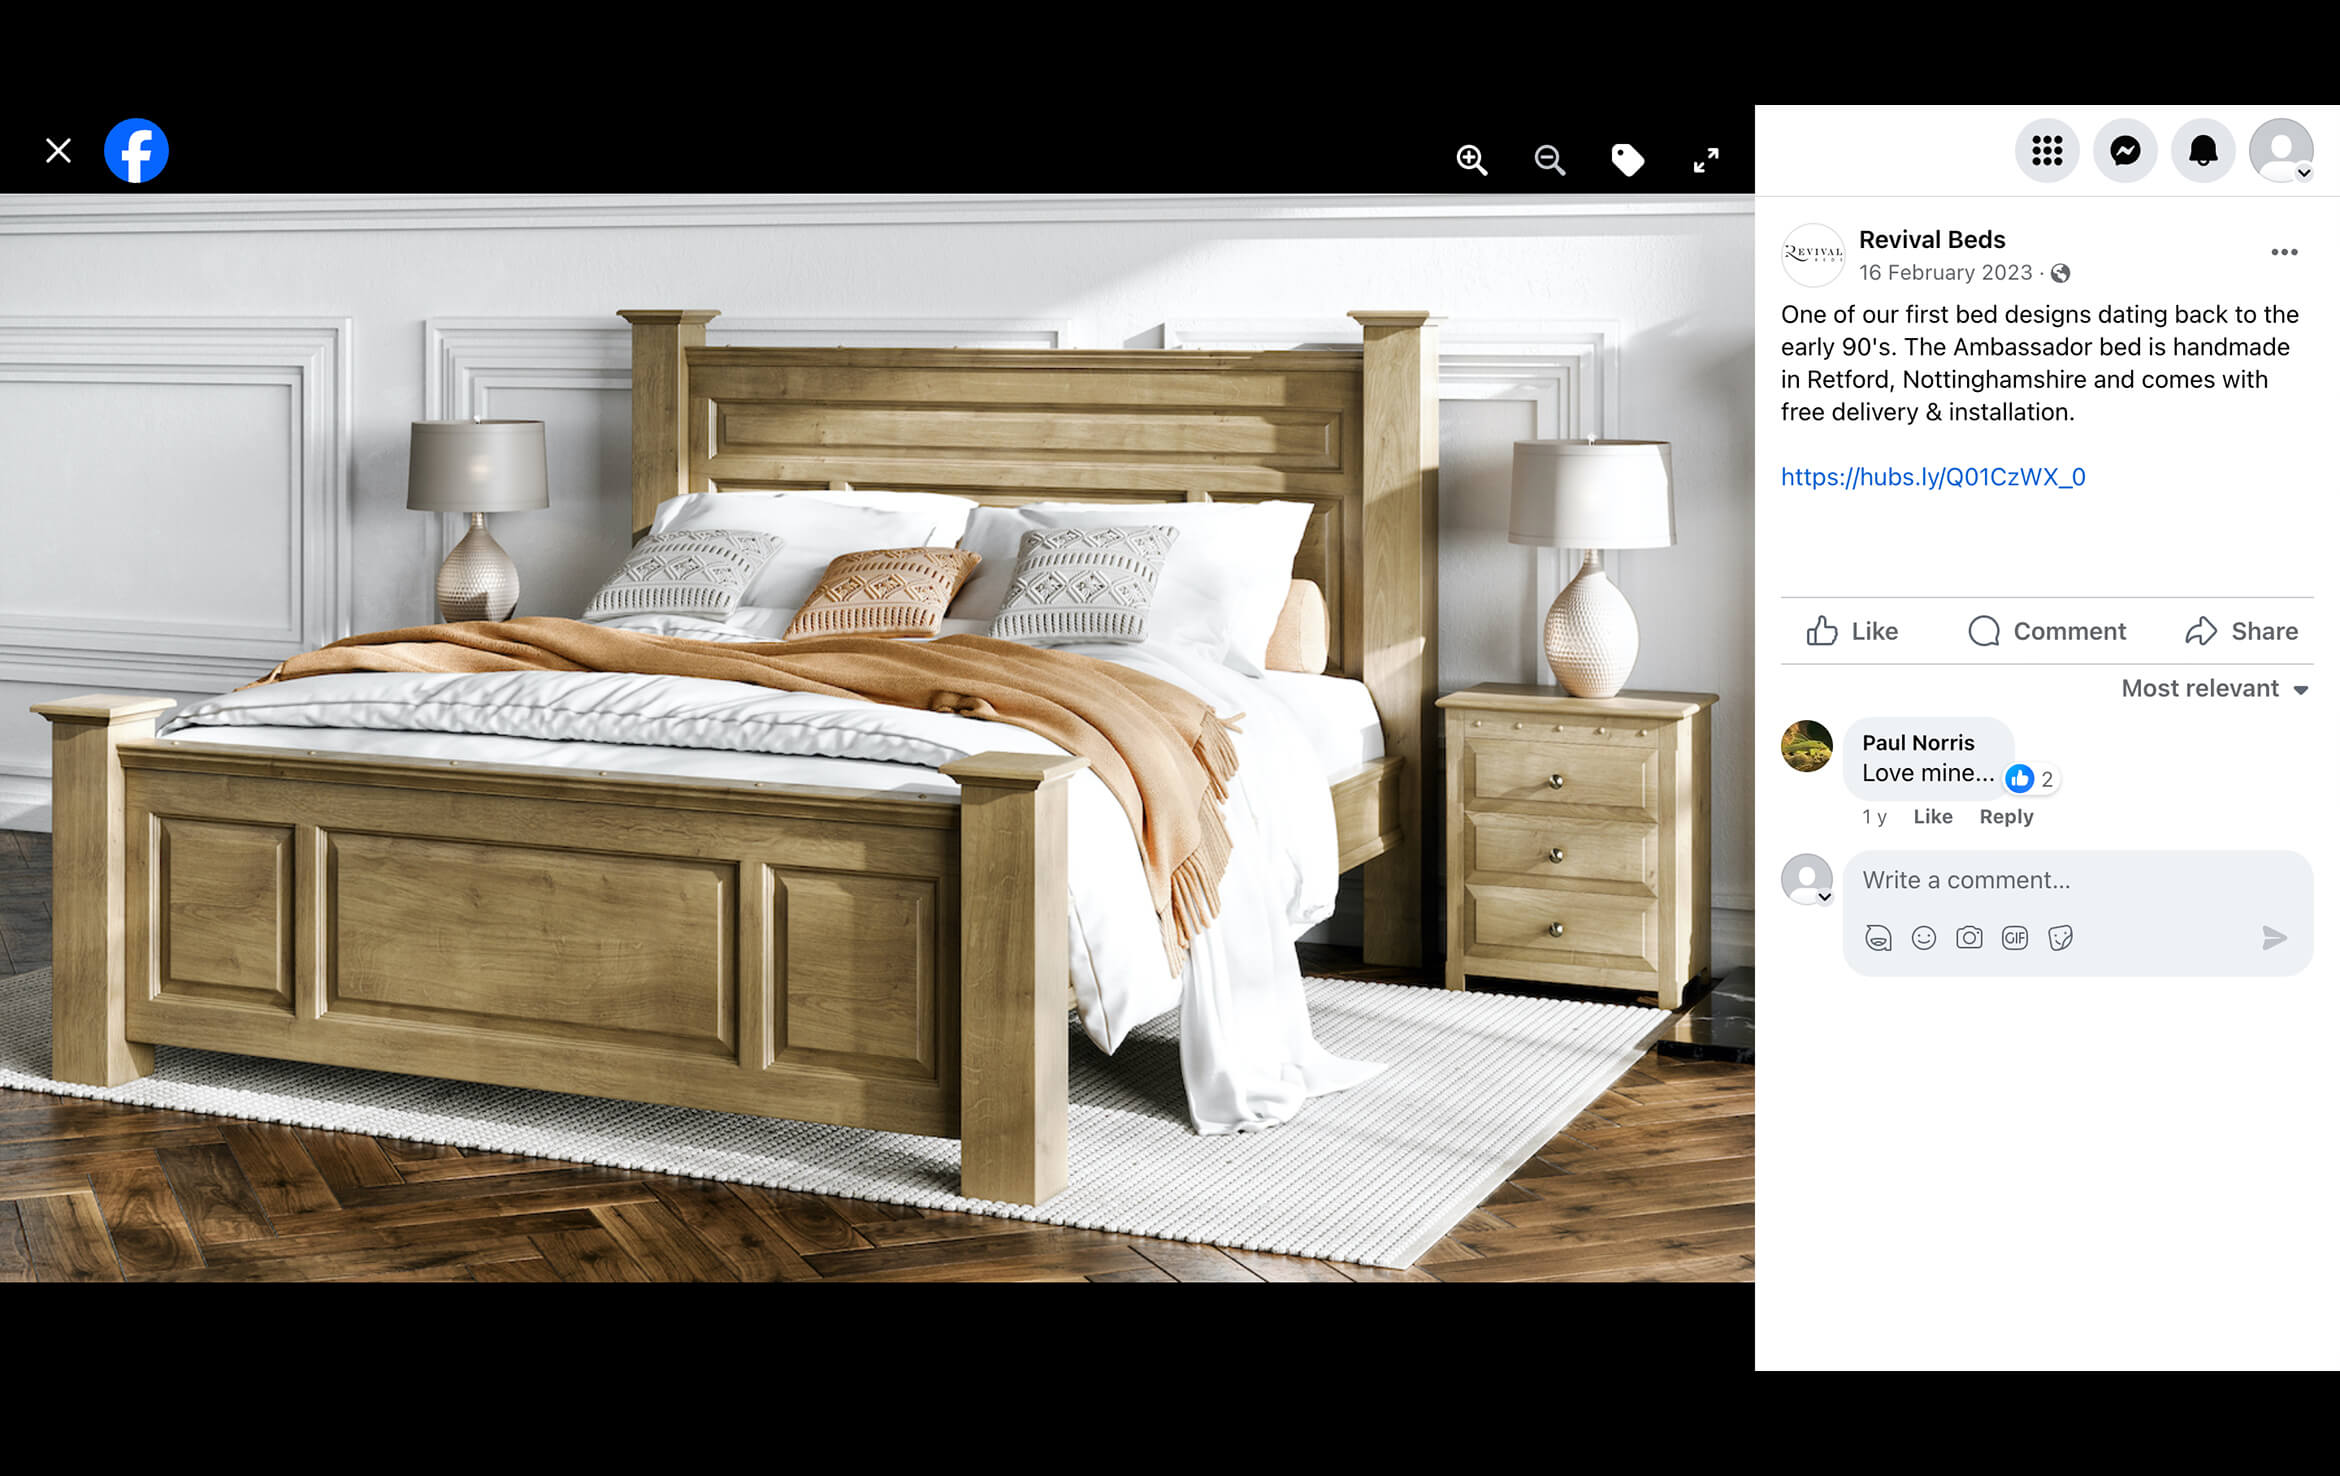 Bedroom Furniture Rendering for a Revival Beds' FB Page